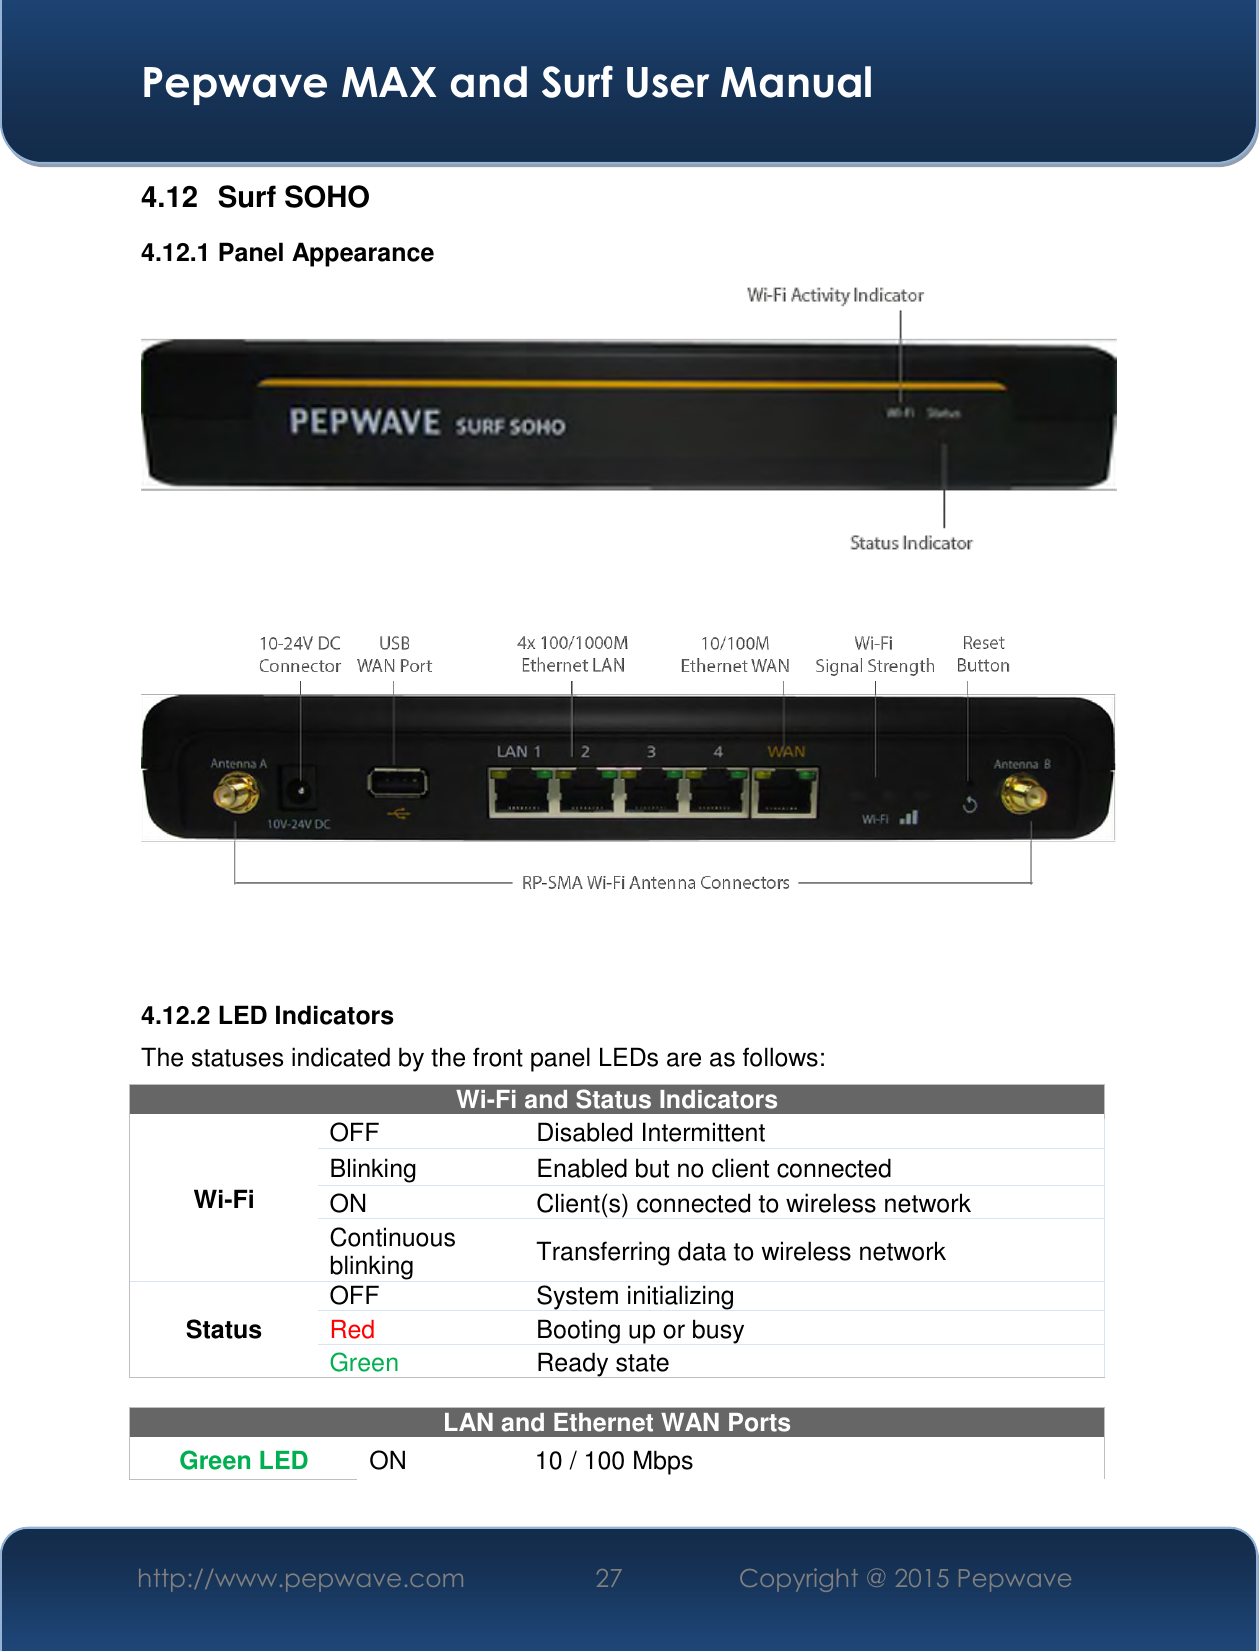  Pepwave MAX and Surf User Manual http://www.pepwave.com 27   Copyright @ 2015 Pepwave   4.12  Surf SOHO 4.12.1 Panel Appearance     4.12.2 LED Indicators The statuses indicated by the front panel LEDs are as follows: Wi-Fi and Status Indicators Wi-Fi OFF  Disabled Intermittent Blinking Enabled but no client connected ON Client(s) connected to wireless network Continuous blinking Transferring data to wireless network Status OFF  System initializing Red Booting up or busy Green Ready state  LAN and Ethernet WAN Ports  Green LED ON 10 / 100 Mbps 